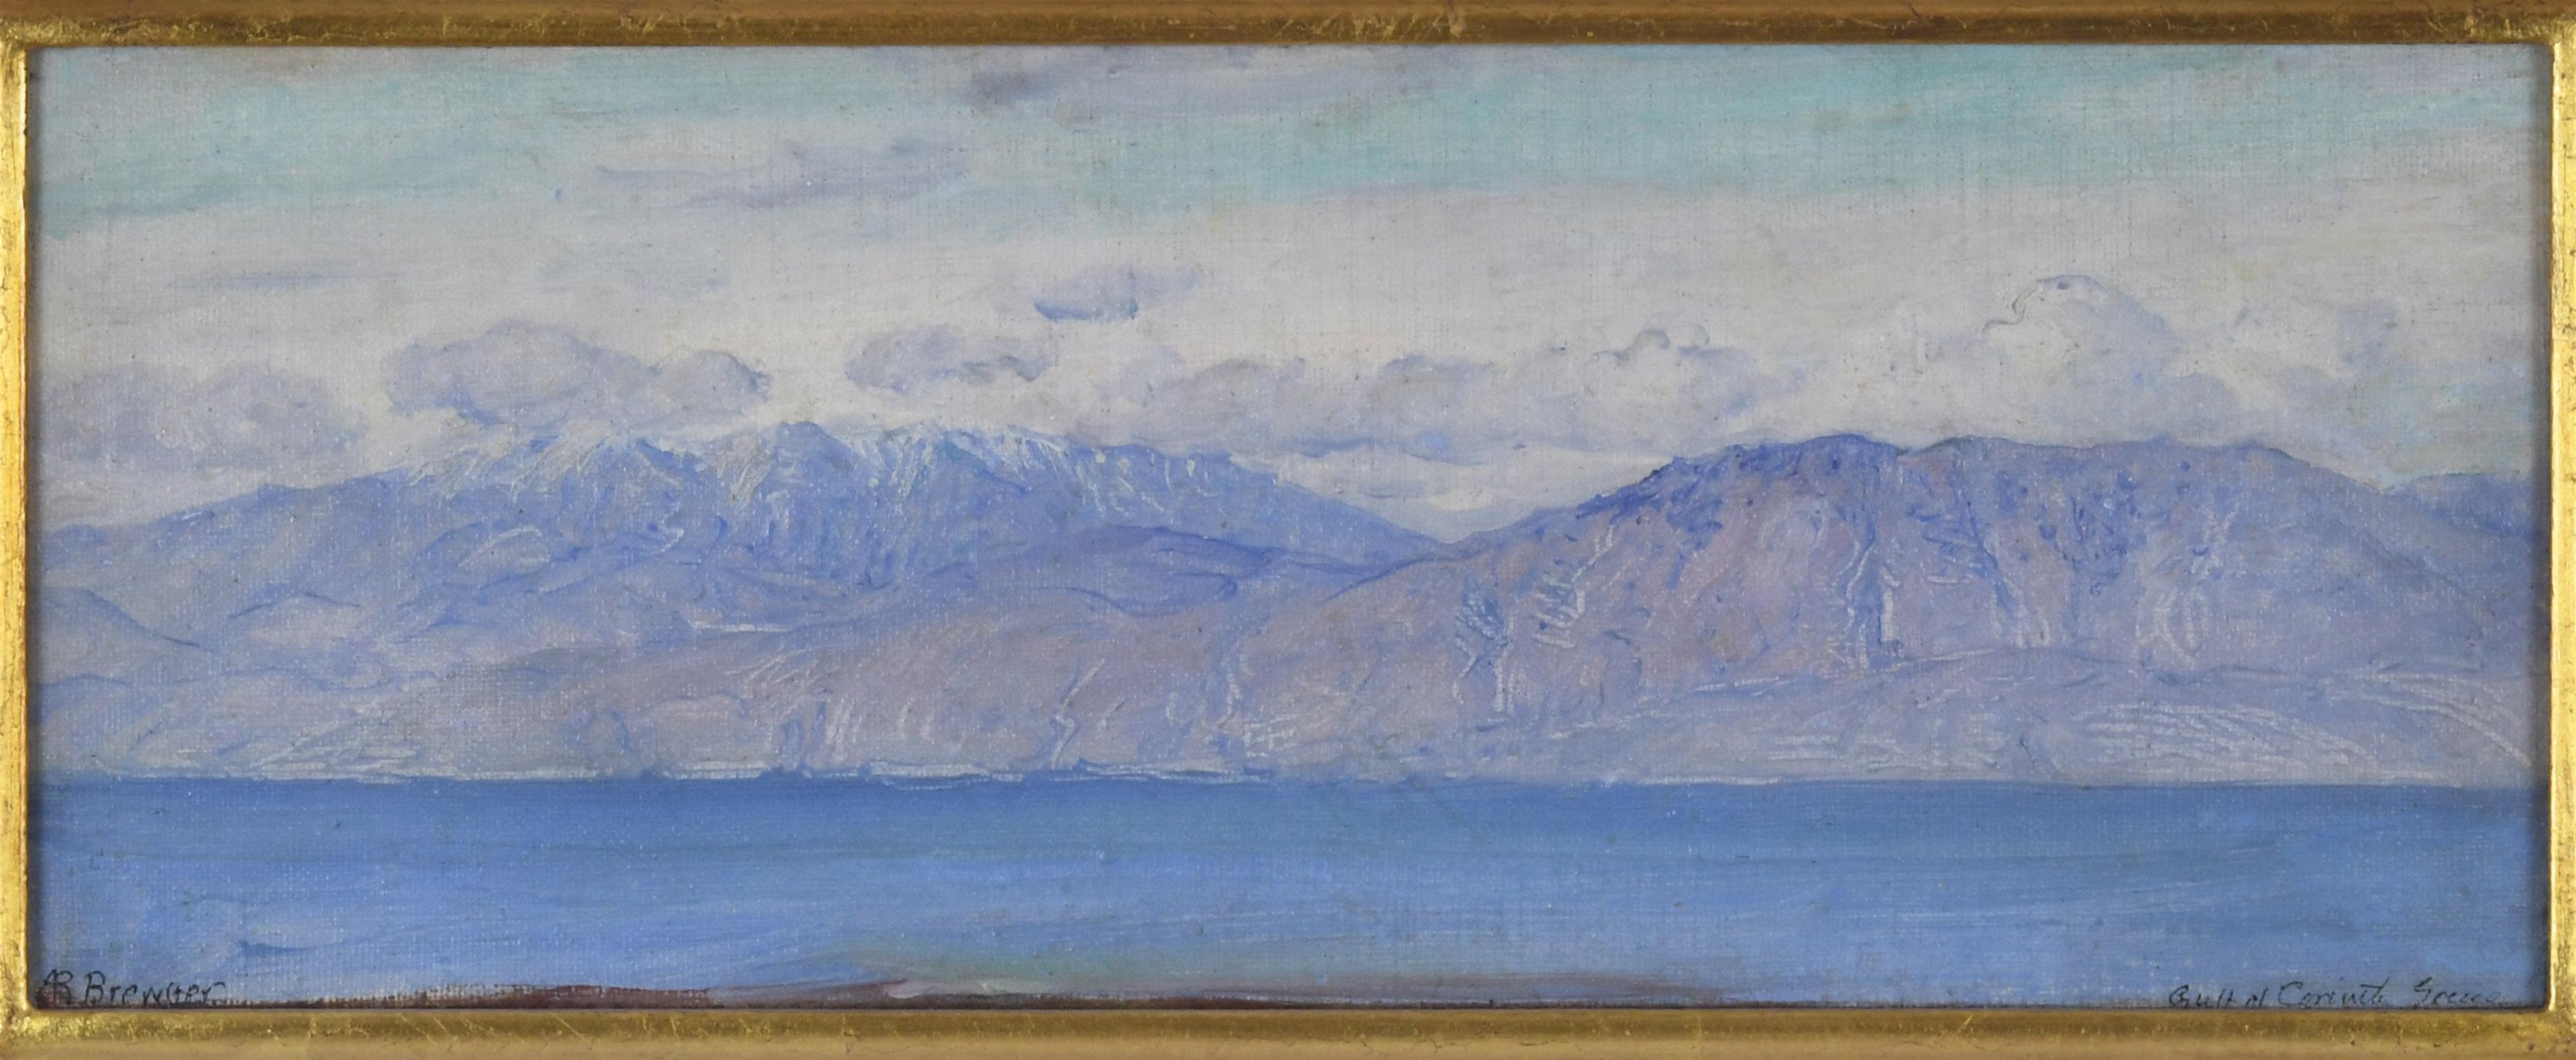 Gulf of Corinth Scene - Painting by Anna Richards Brewster